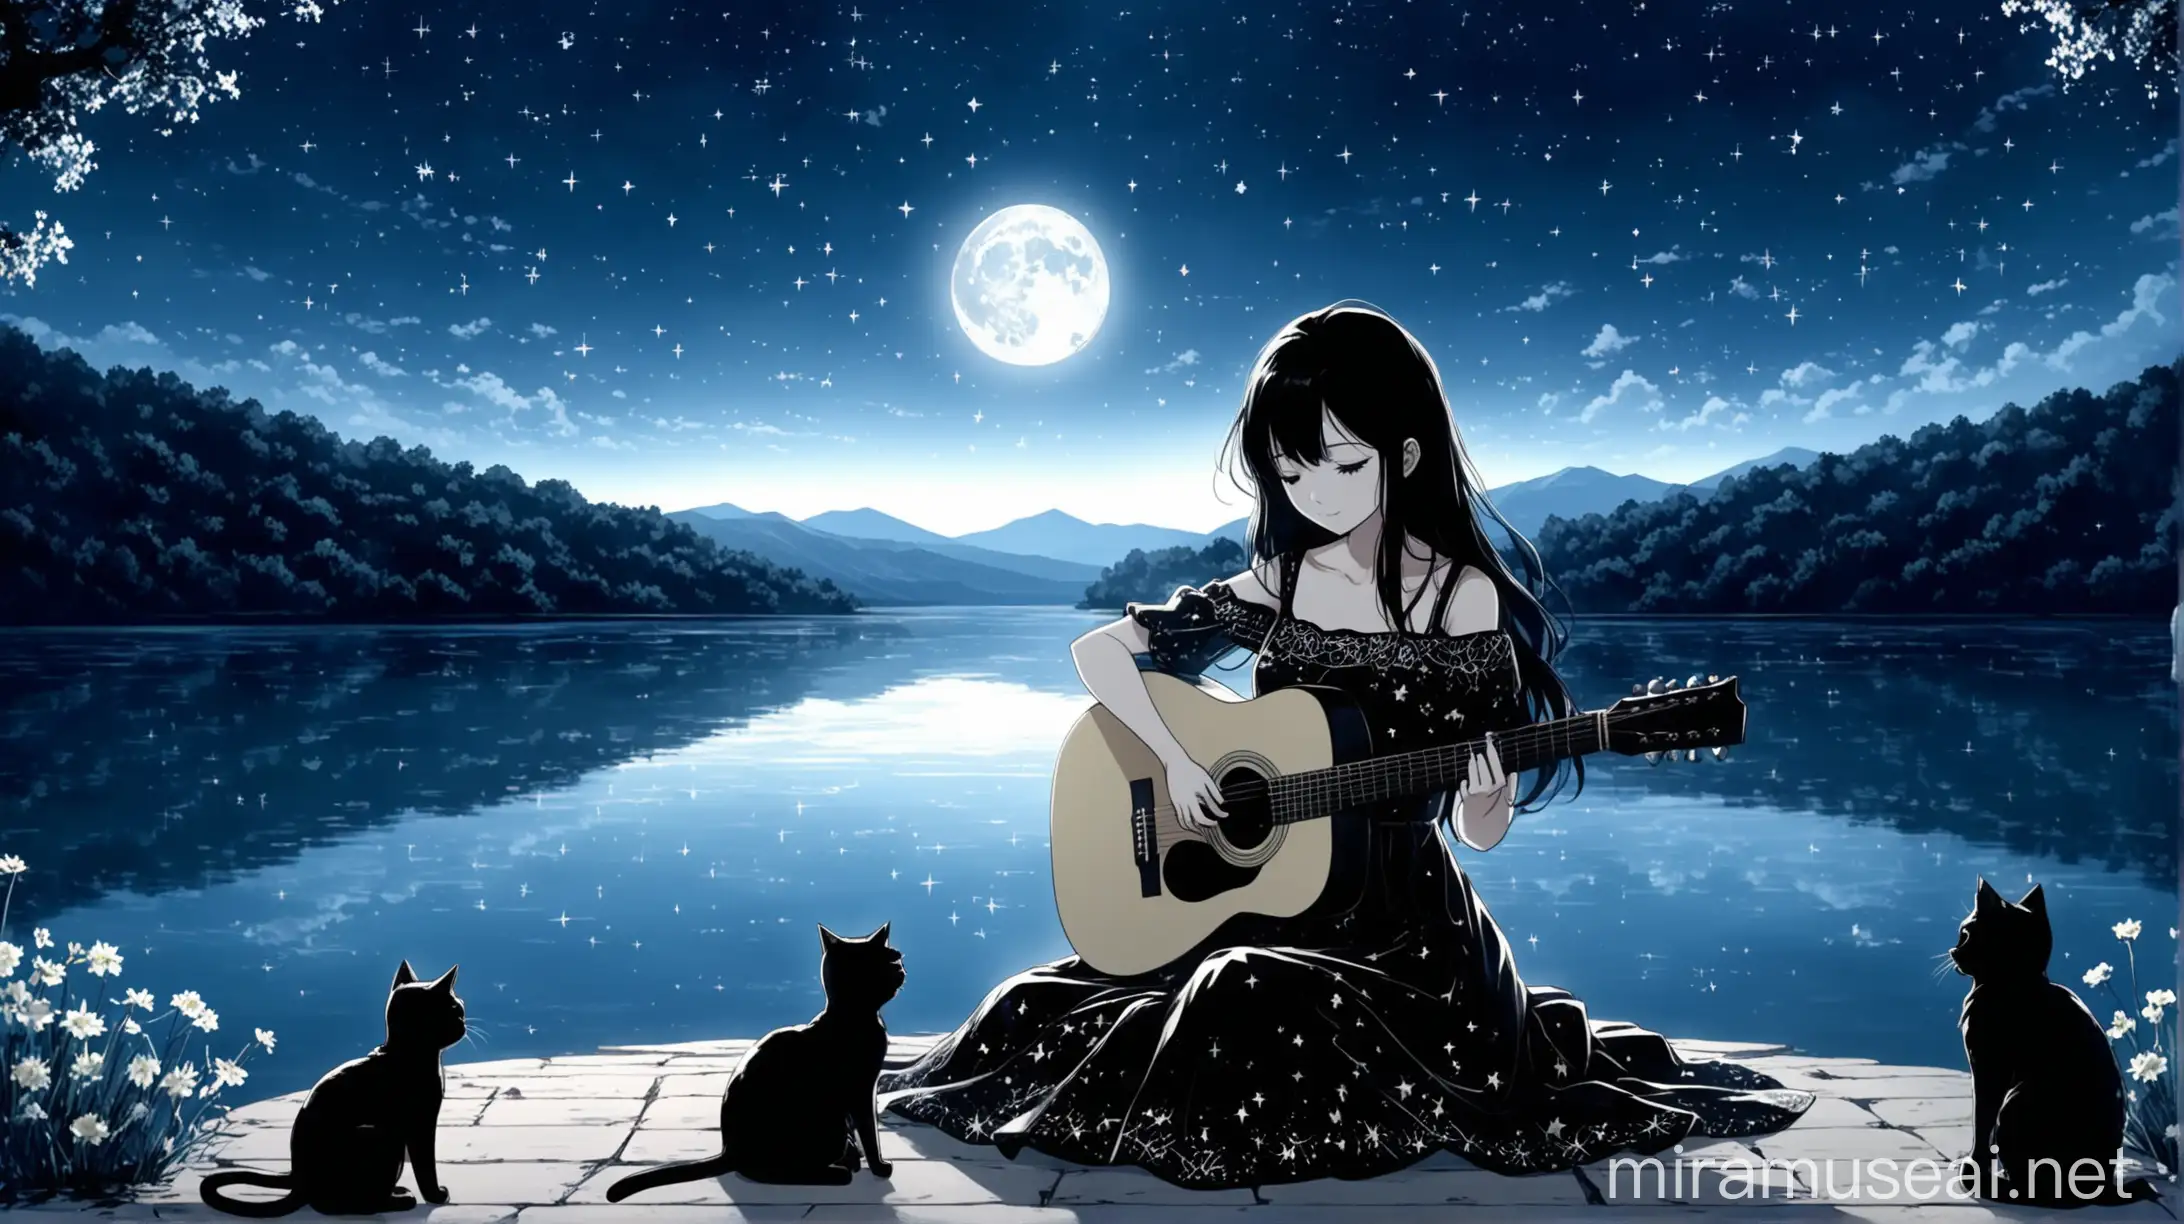 A girl, with long black hair, black and white dress with black flowers, sitting cross-legged on the ground. playing guitar, in front of her is a most majestic lake. A cat resting nearby, ▁elle, she plays her melody through the night with the Moon reflected on the lake and the stars full in the sky, style anime 